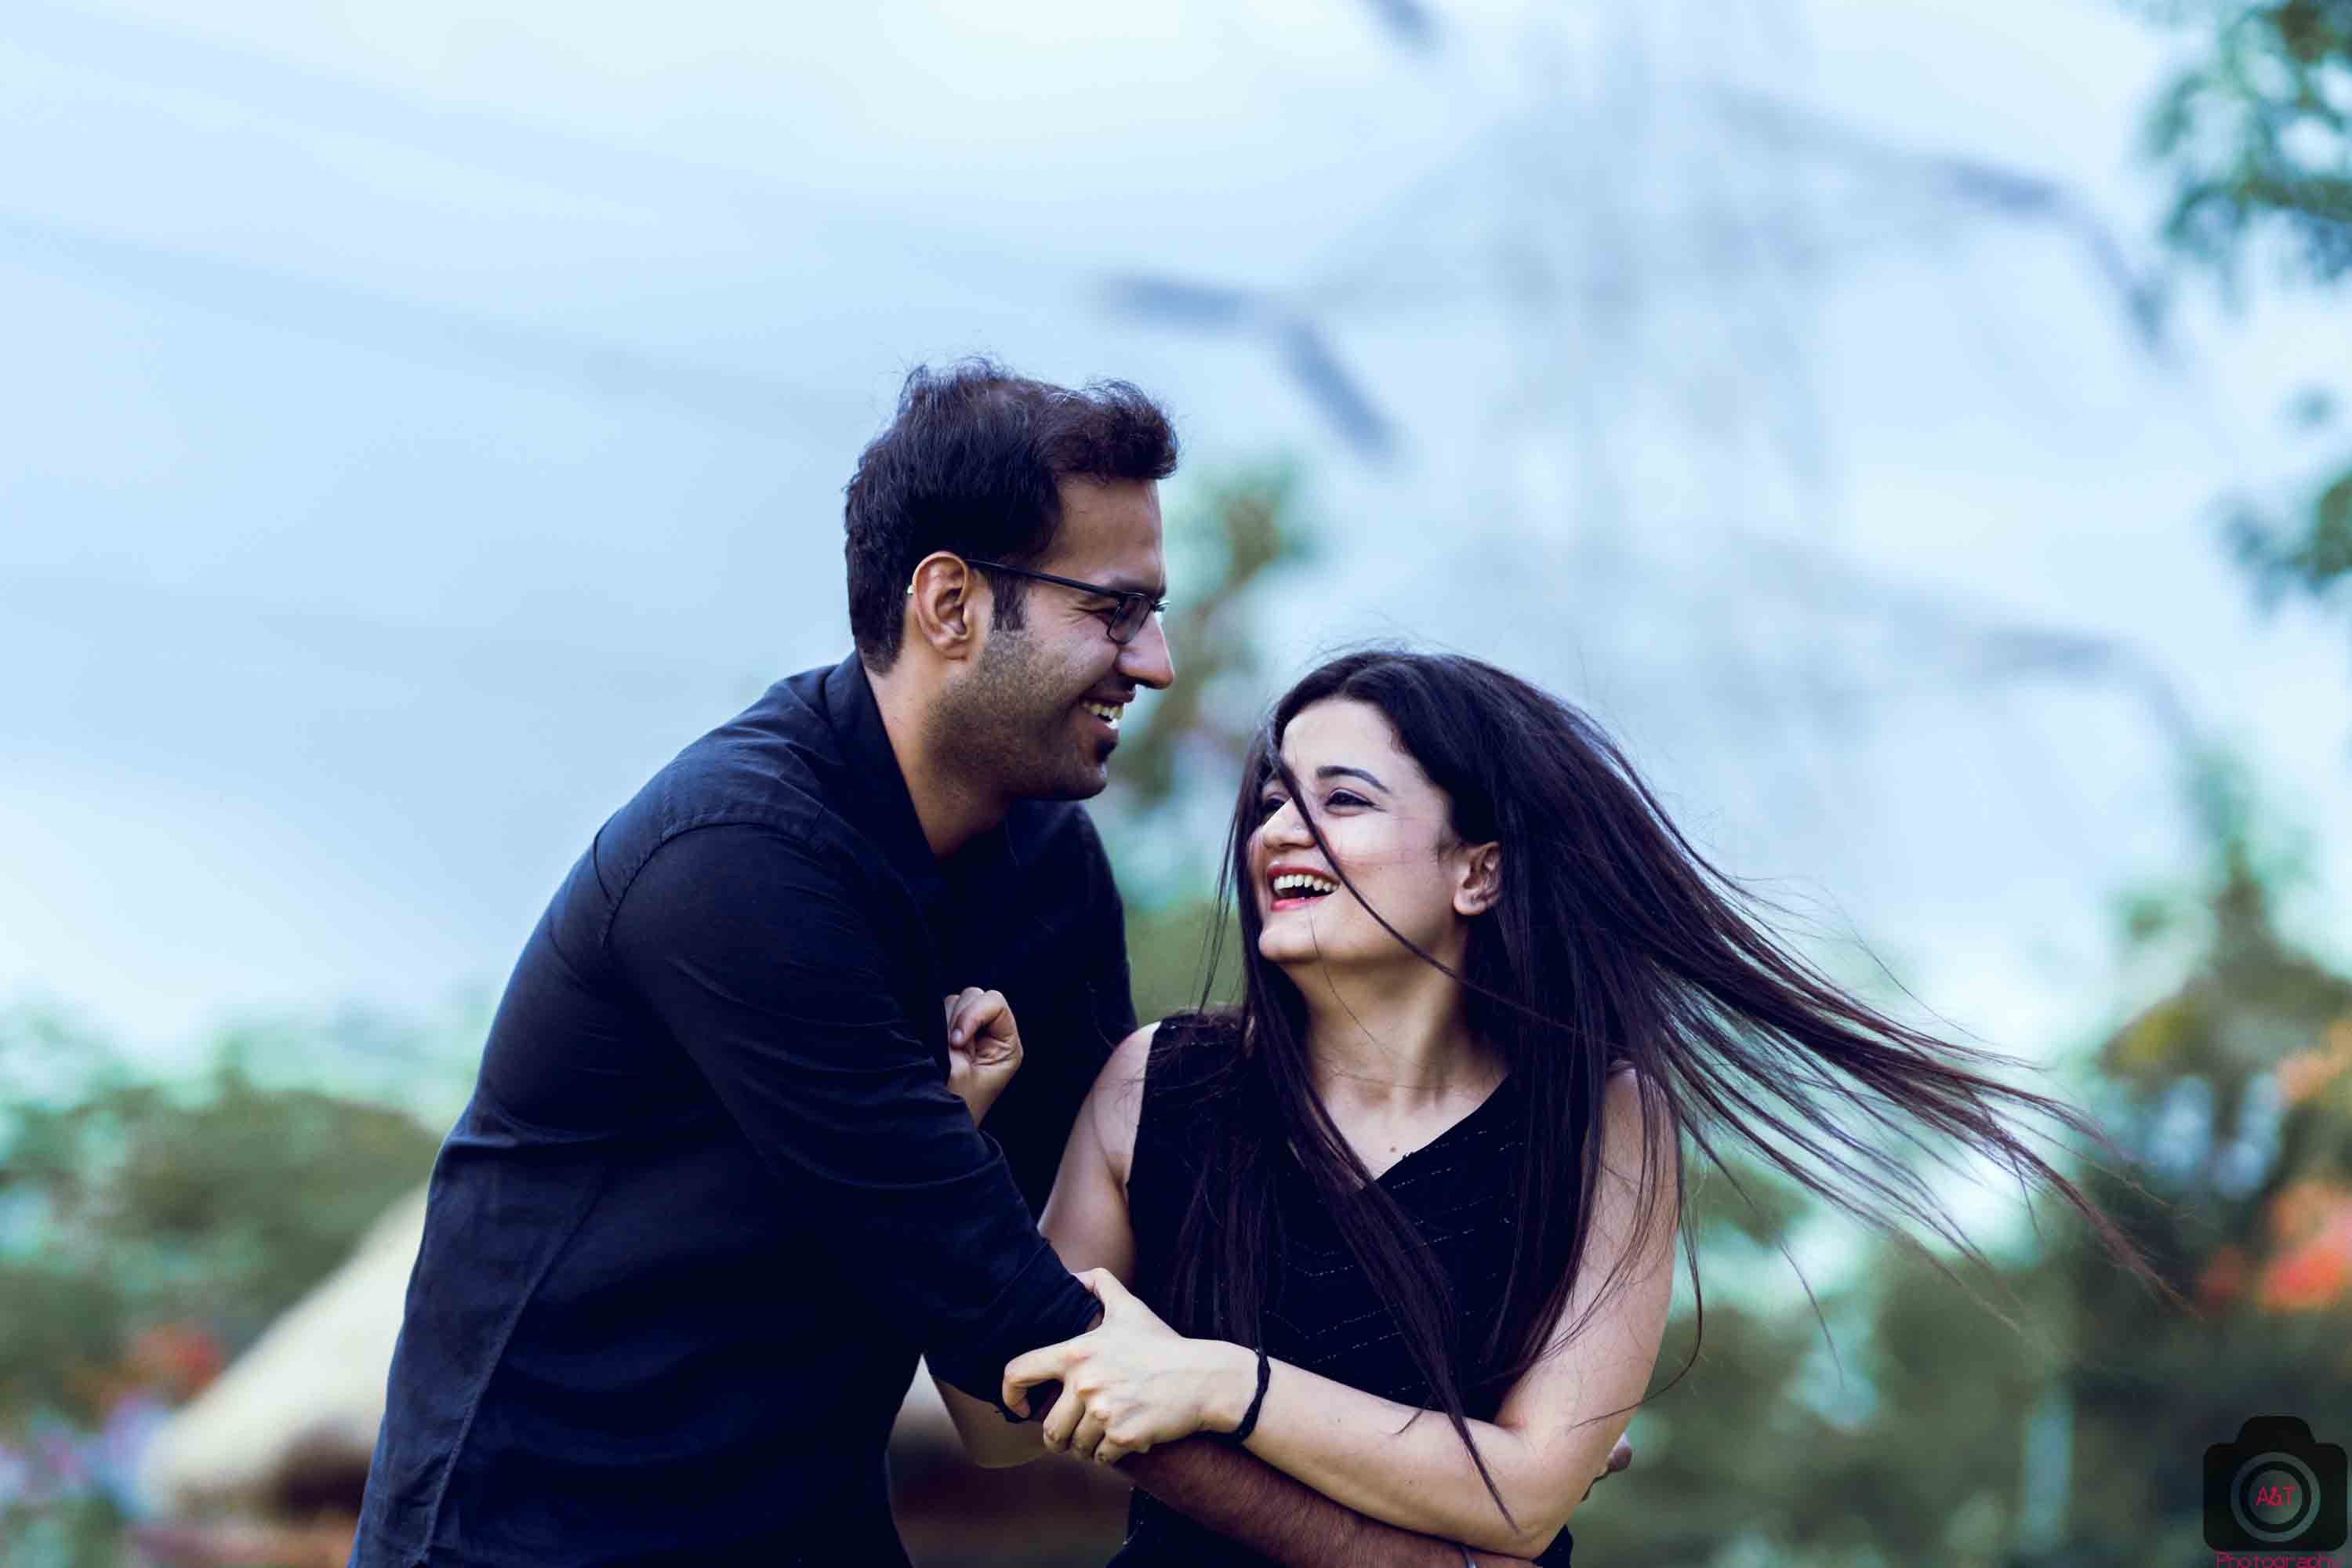 Best Funny Pre-wedding Poses from Shilpa & Pulkkit's Pune Pre-wedding Photoshoot clicked by A&T Photography.